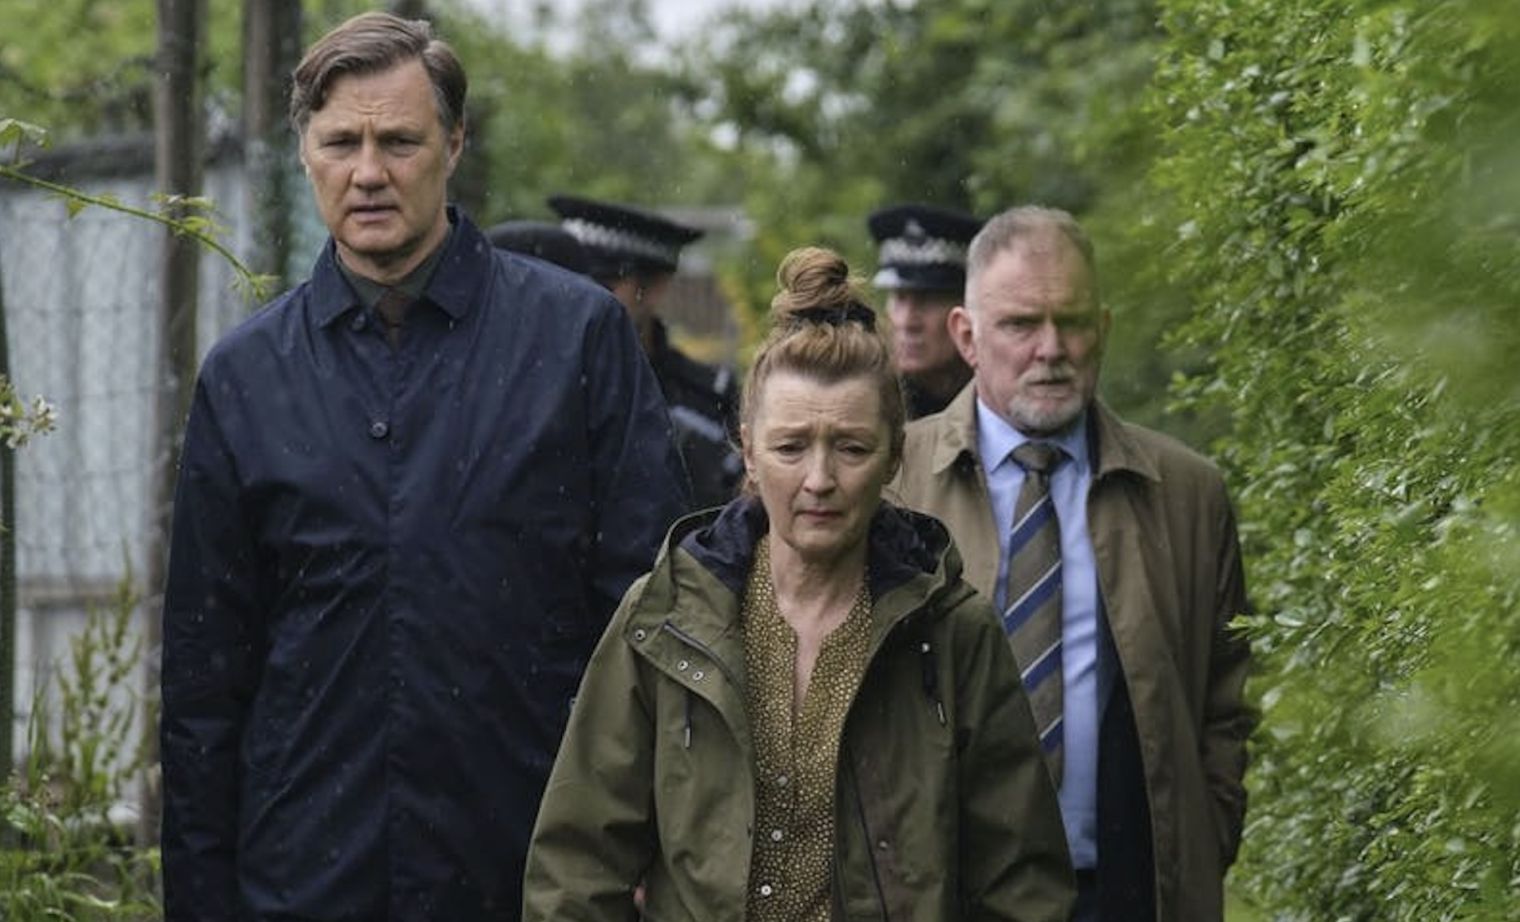 David Morrissey to star in the BBC's new crime drama Sherwood inspired by the true story of two separate killings in Nottinghamshire two decades ago